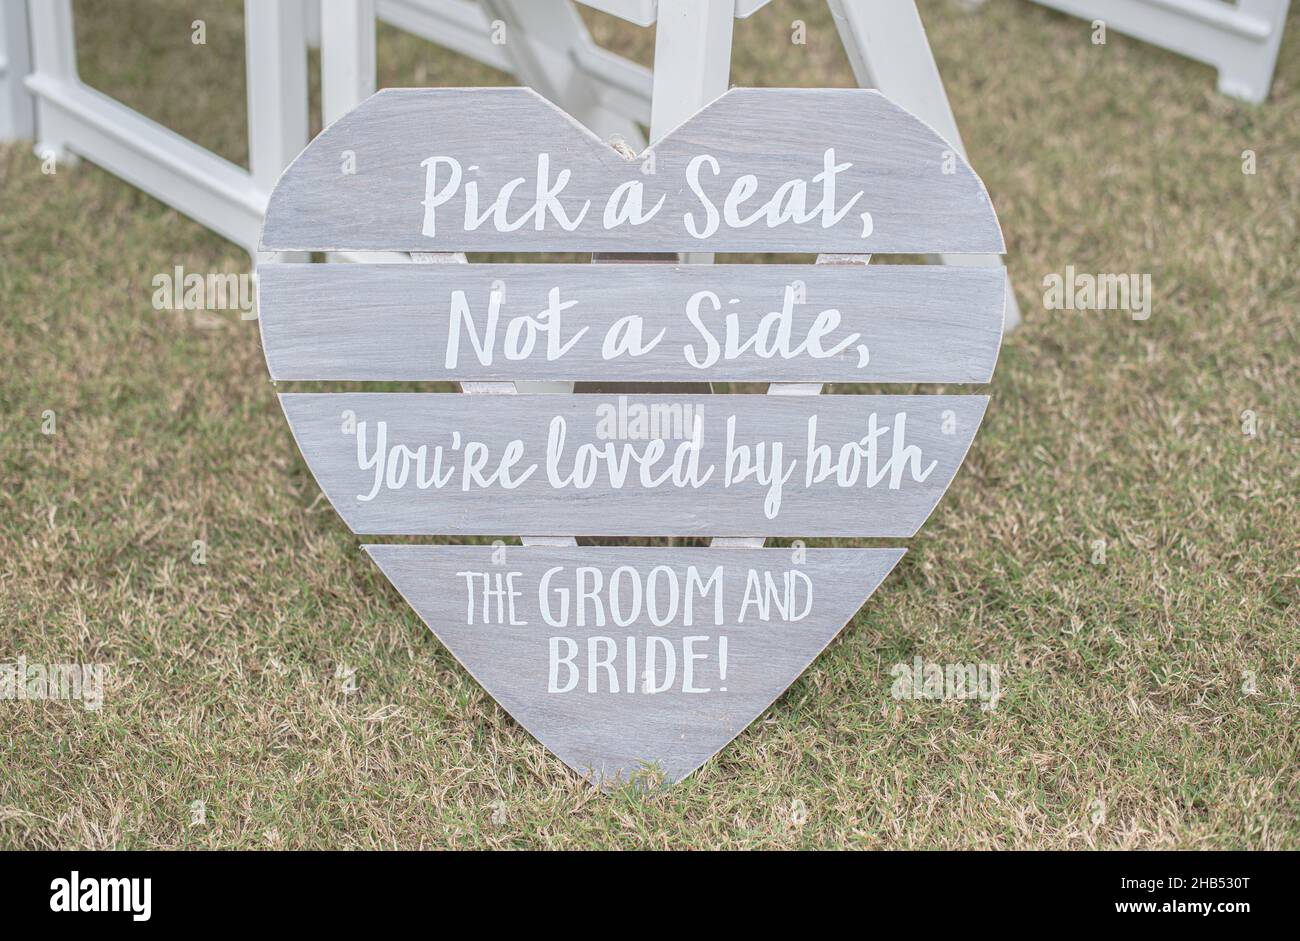 Pick a seat not a side wedding ceremony sign made of wood in the